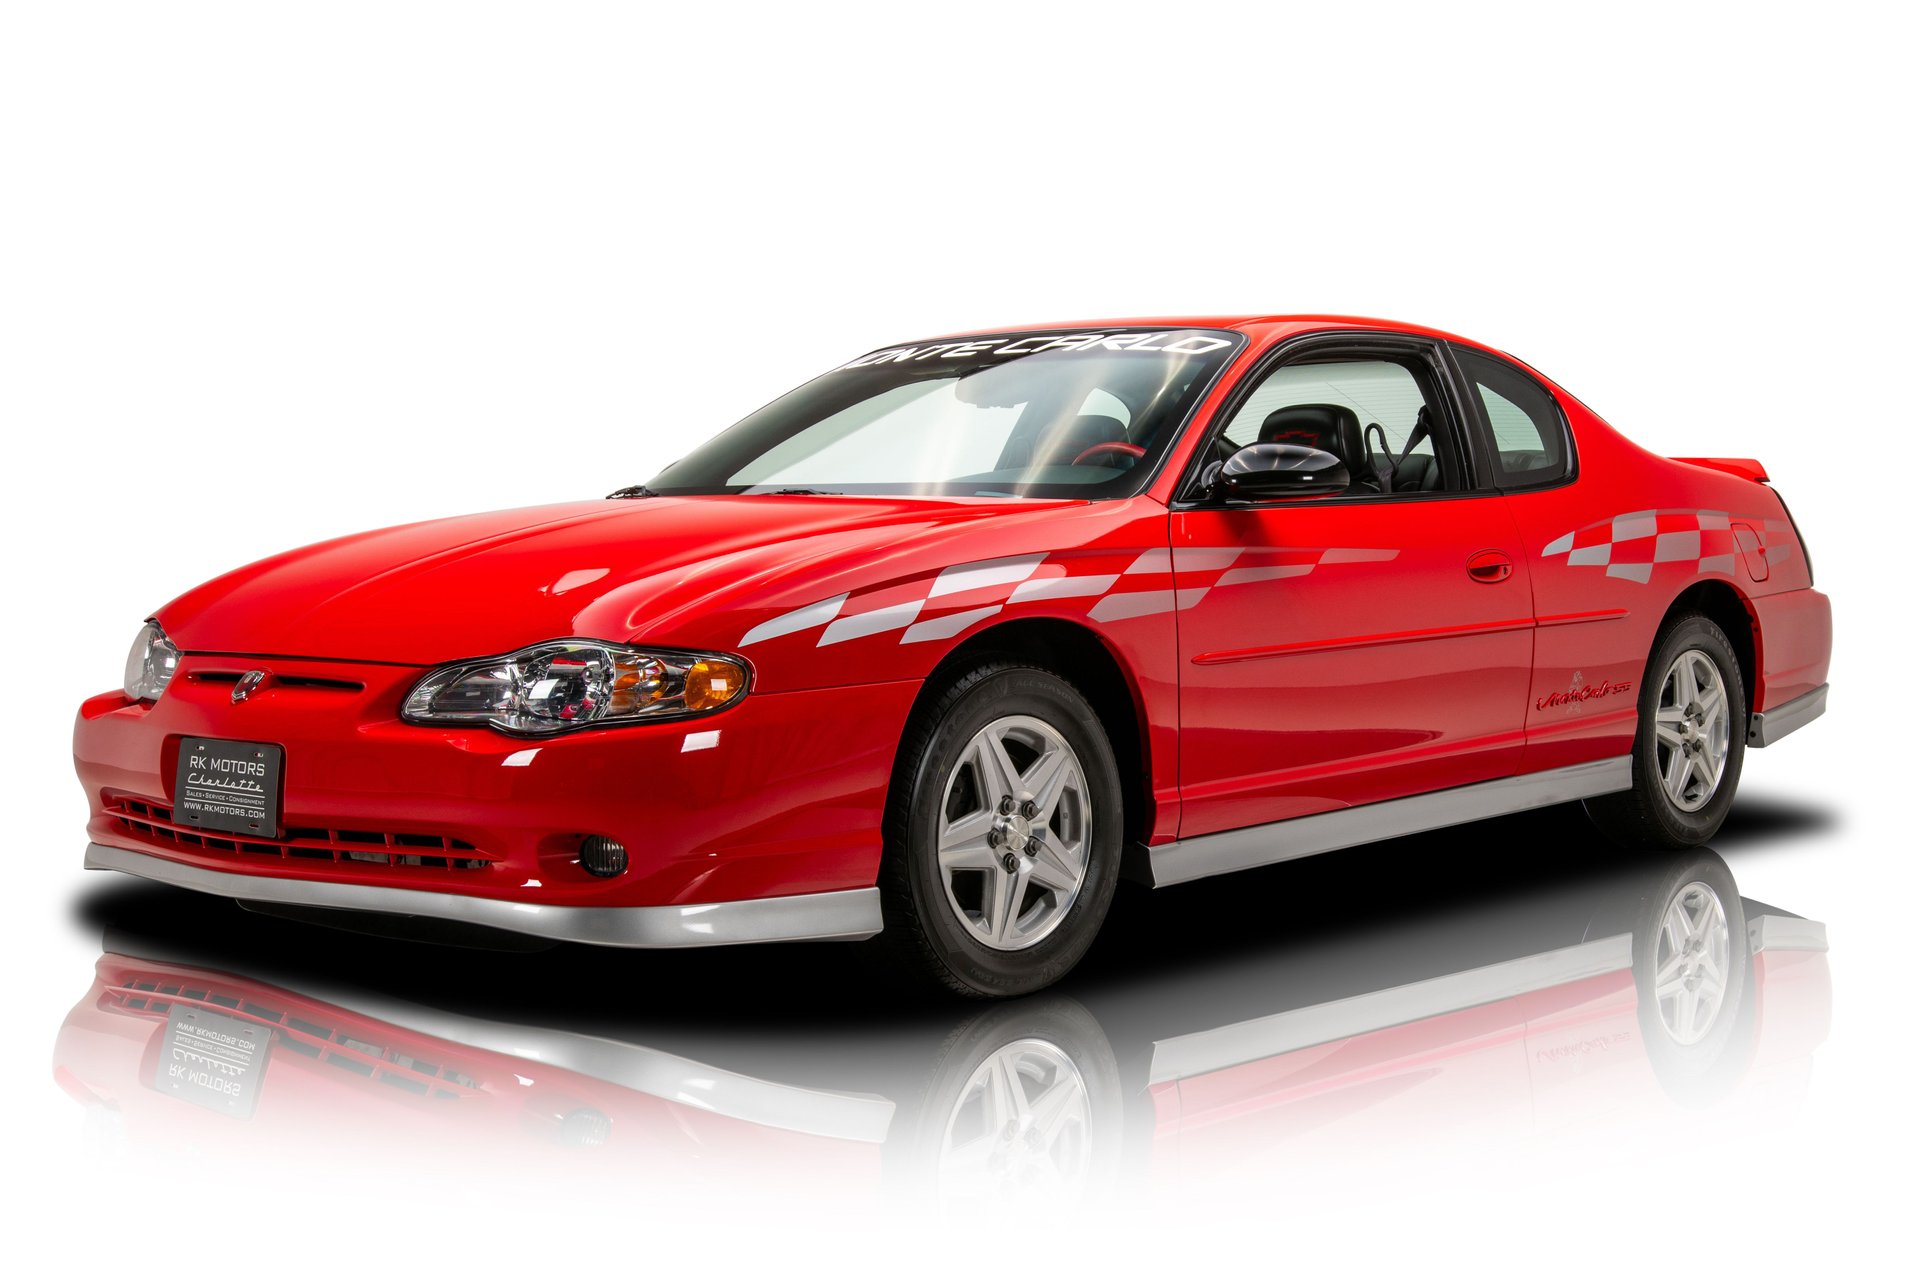 2000 chevrolet monte carlo ss pace car edition